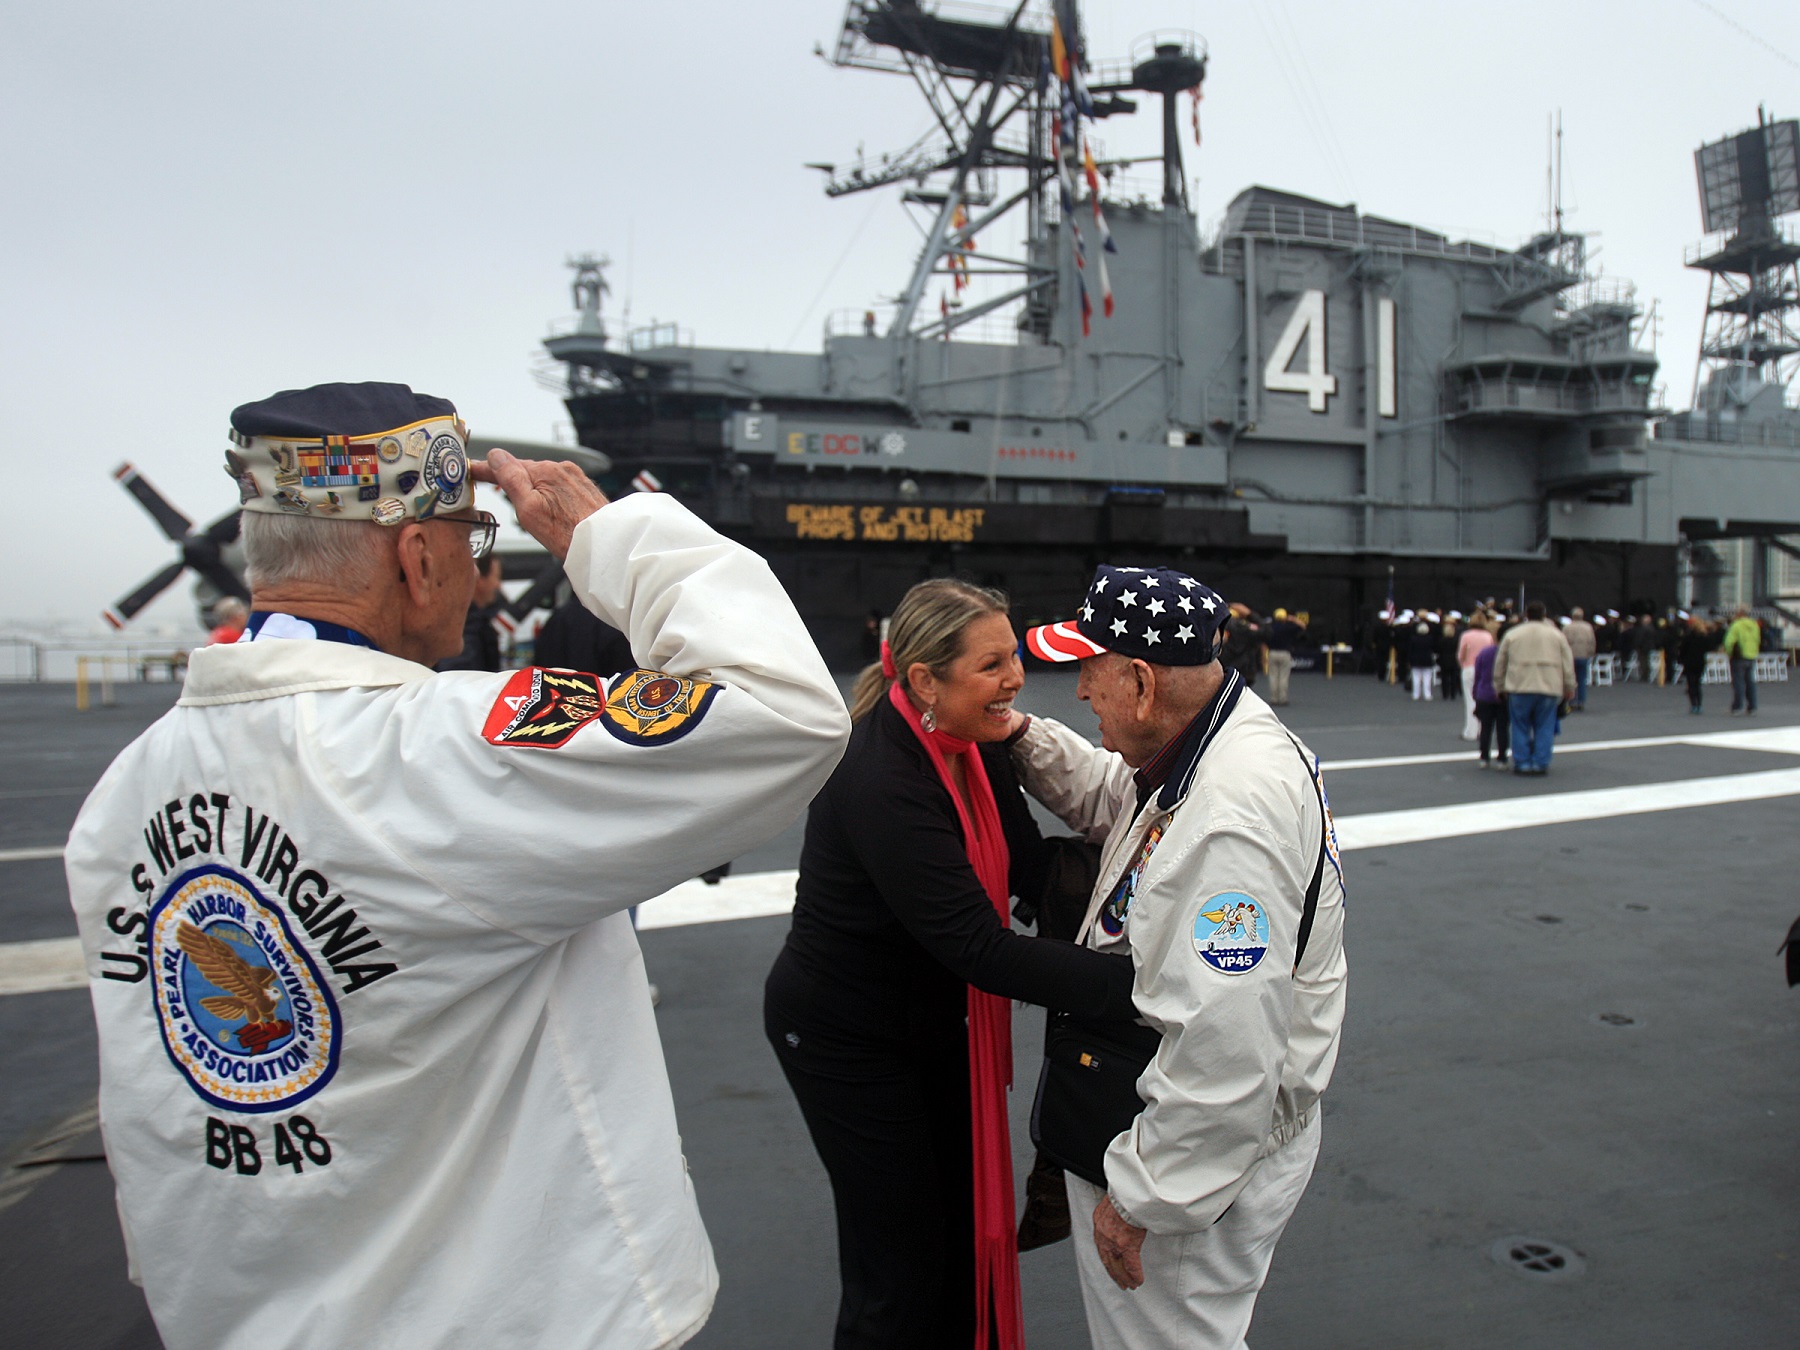 Pearl Harbor survivors Stu Hedley, 91, left, salutes, as Doyle McKee is thanked for his service by Rebecca Shaffner during the annual Pearl Harbor Day Remembrance Ceremony aboard the USS Midway Museum's Flight Deck in San Diego, Friday Dec. 7, 2012. (Photo by Allen J. Schaben/Los Angeles Times via Getty Images)